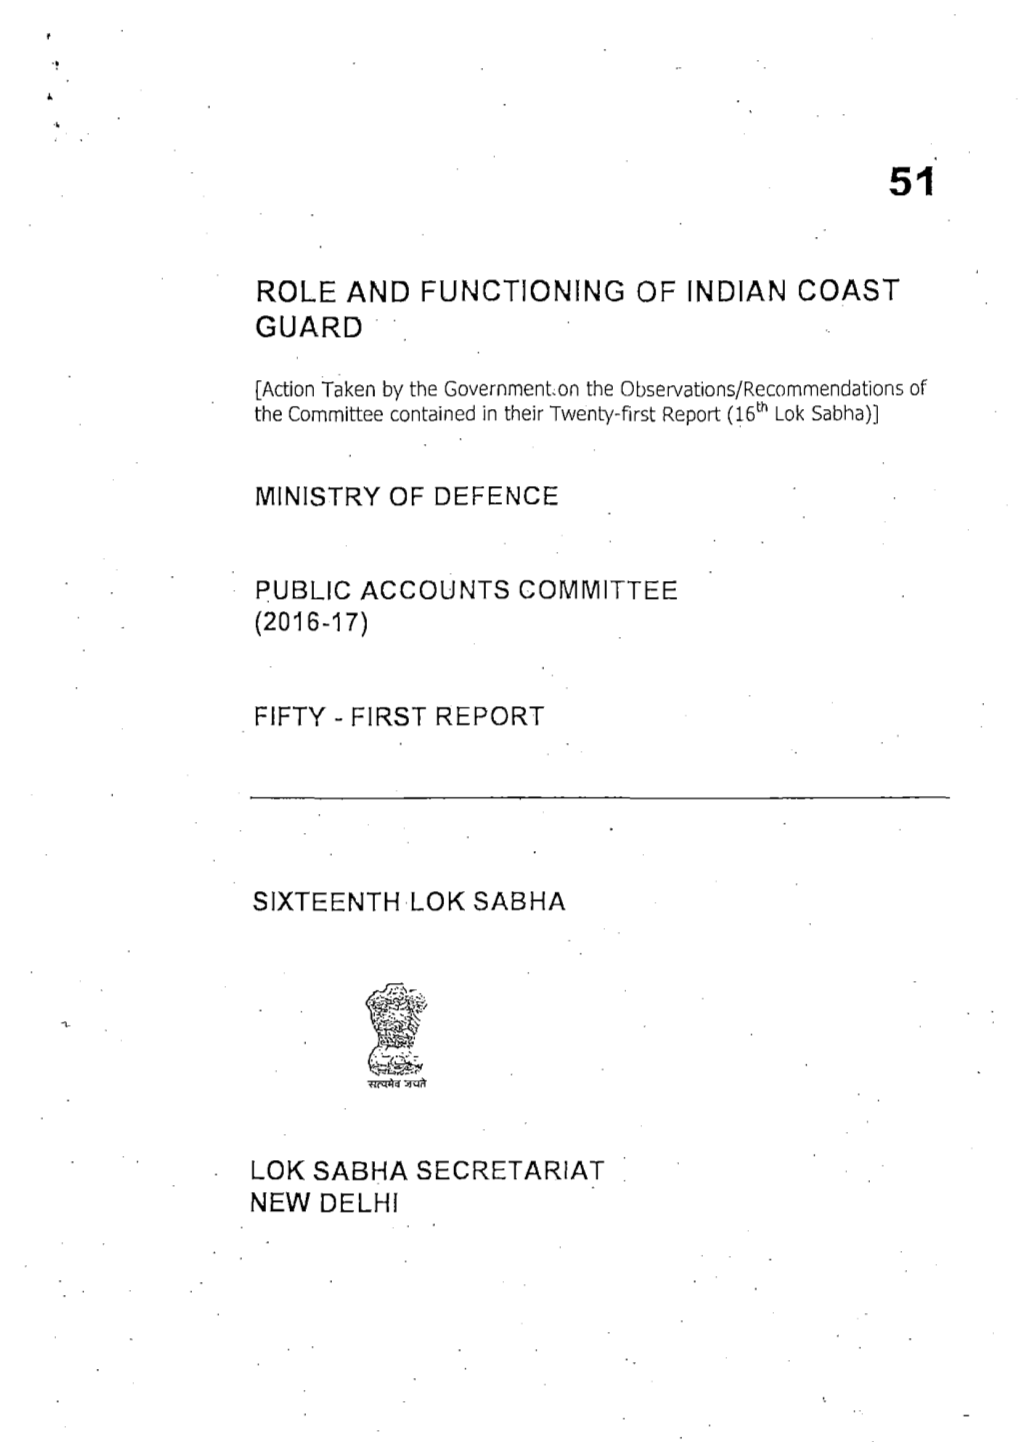 Role and Functioning of Indian Coast Guard